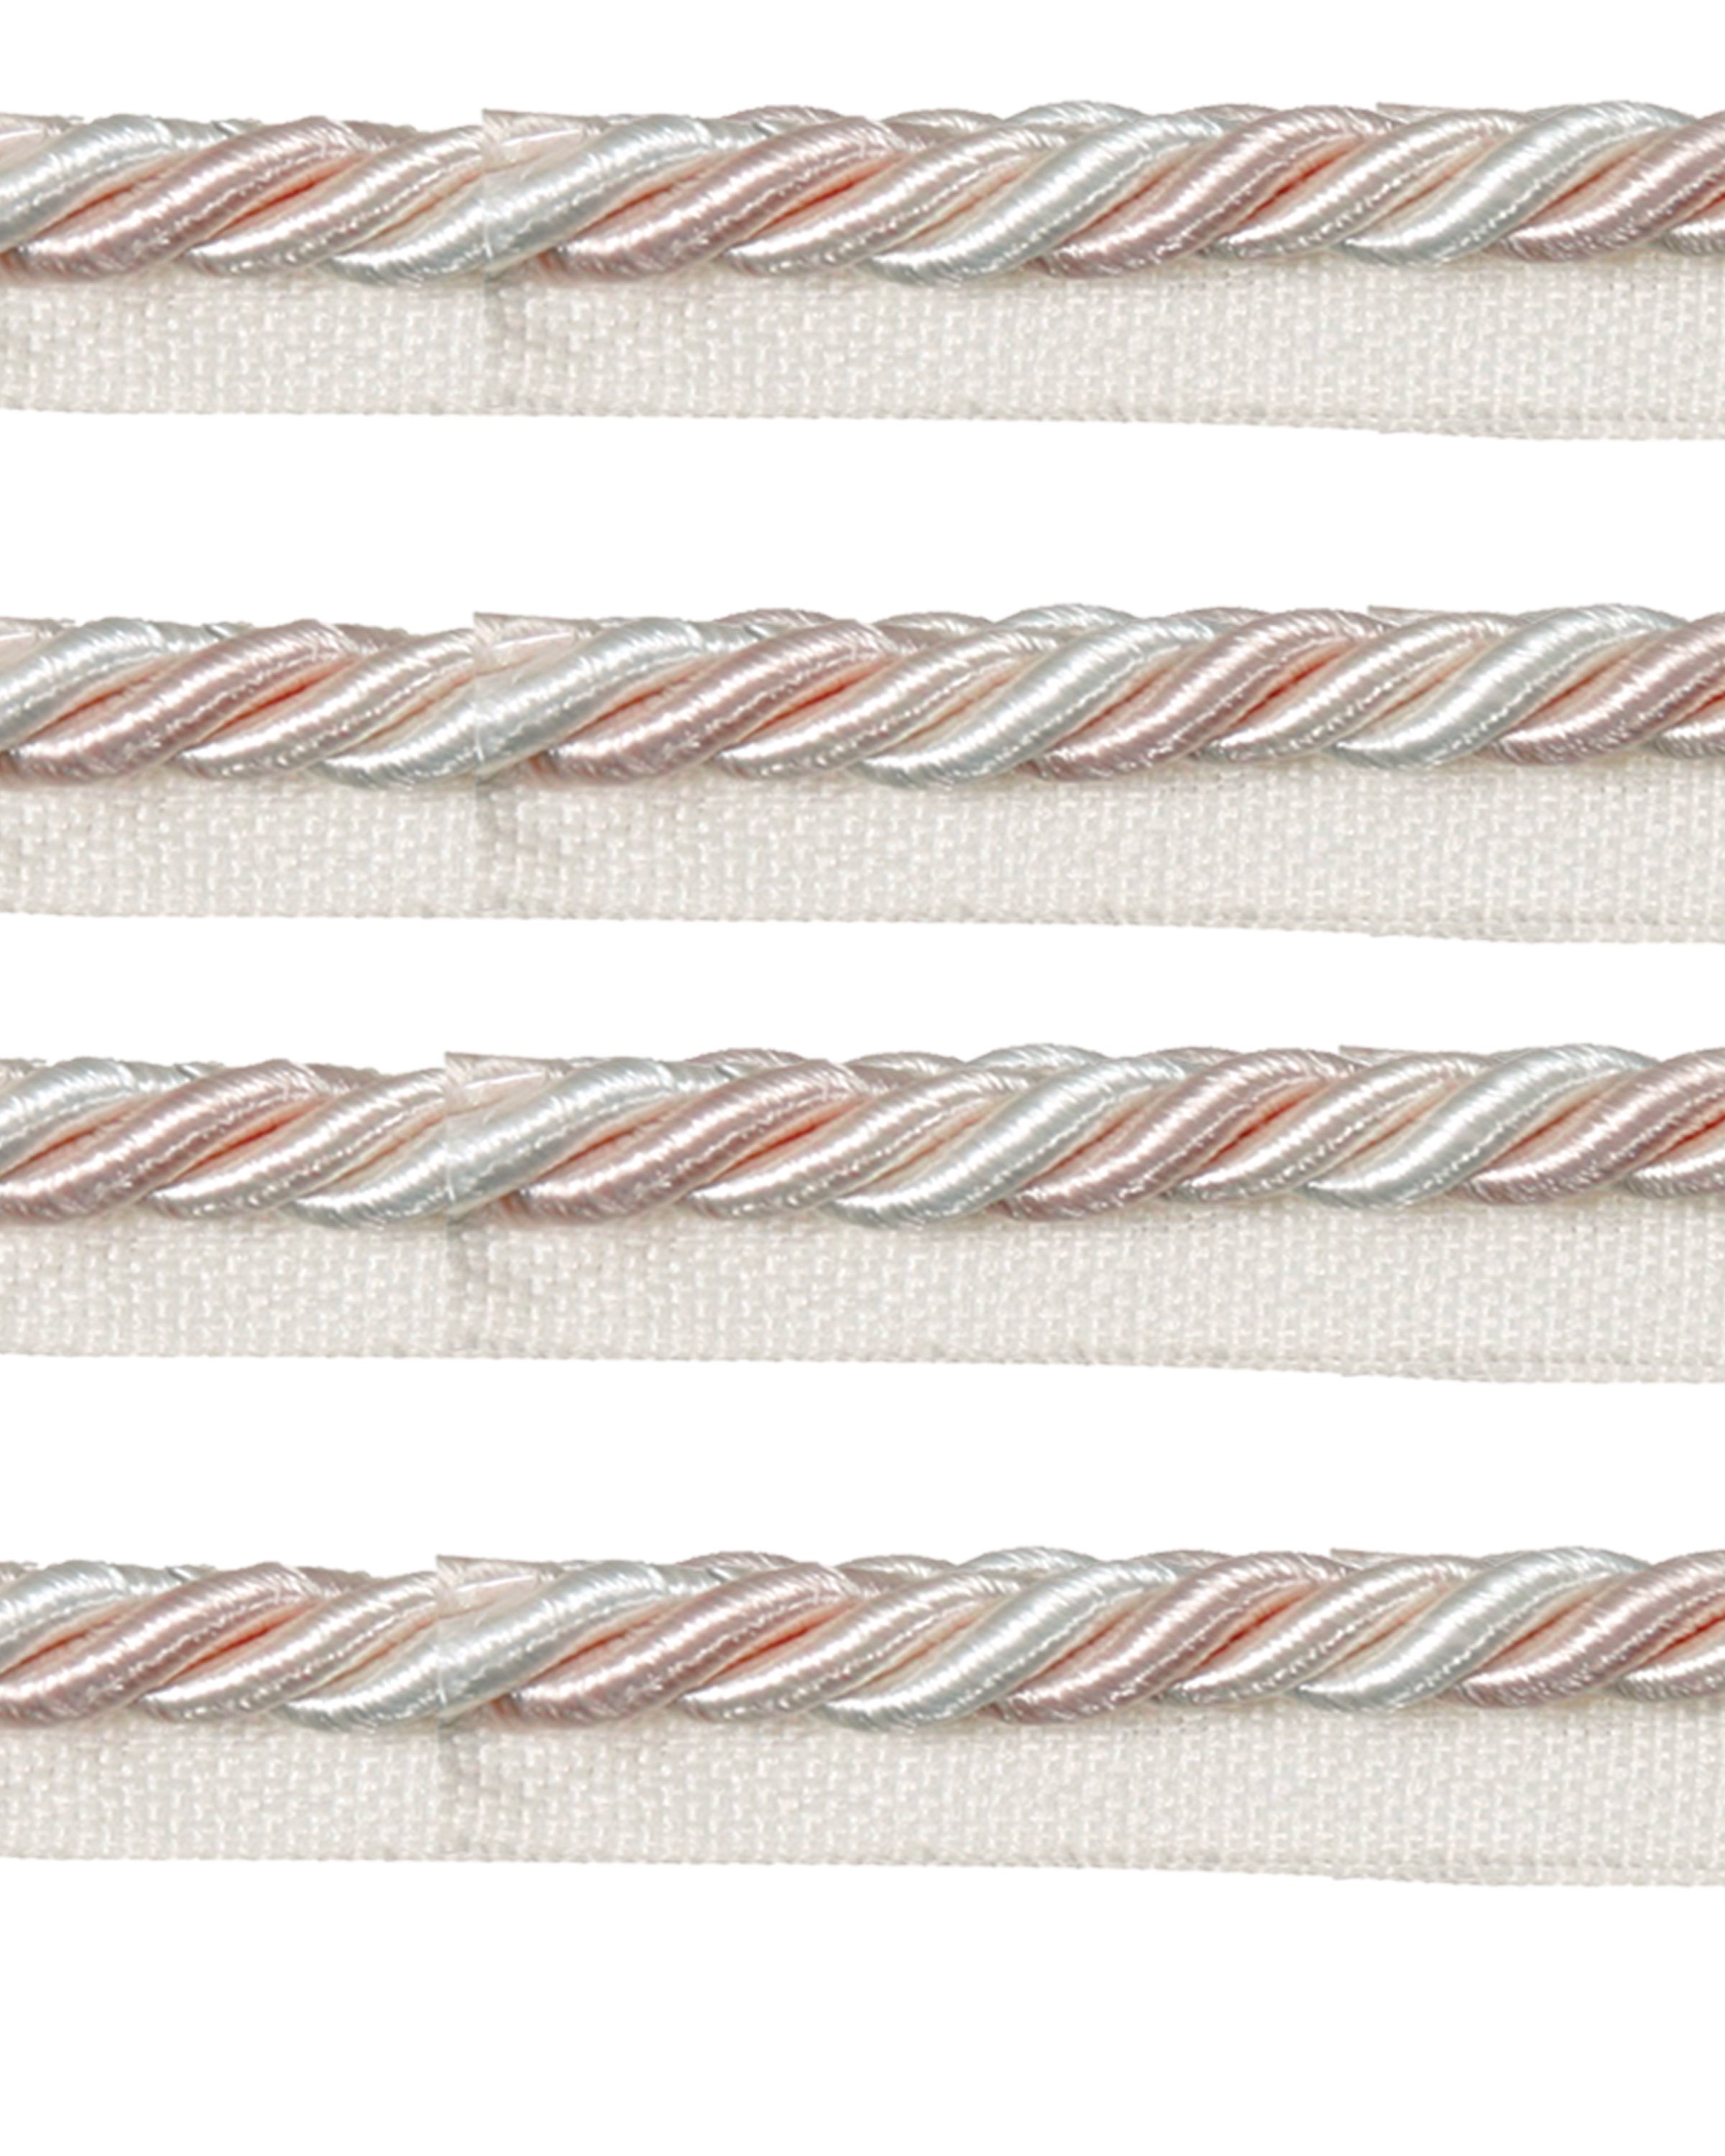 Piping Cord 8mm 2 Tone Twist on Tape - Light Pink / Cream Price is for 5 metres 